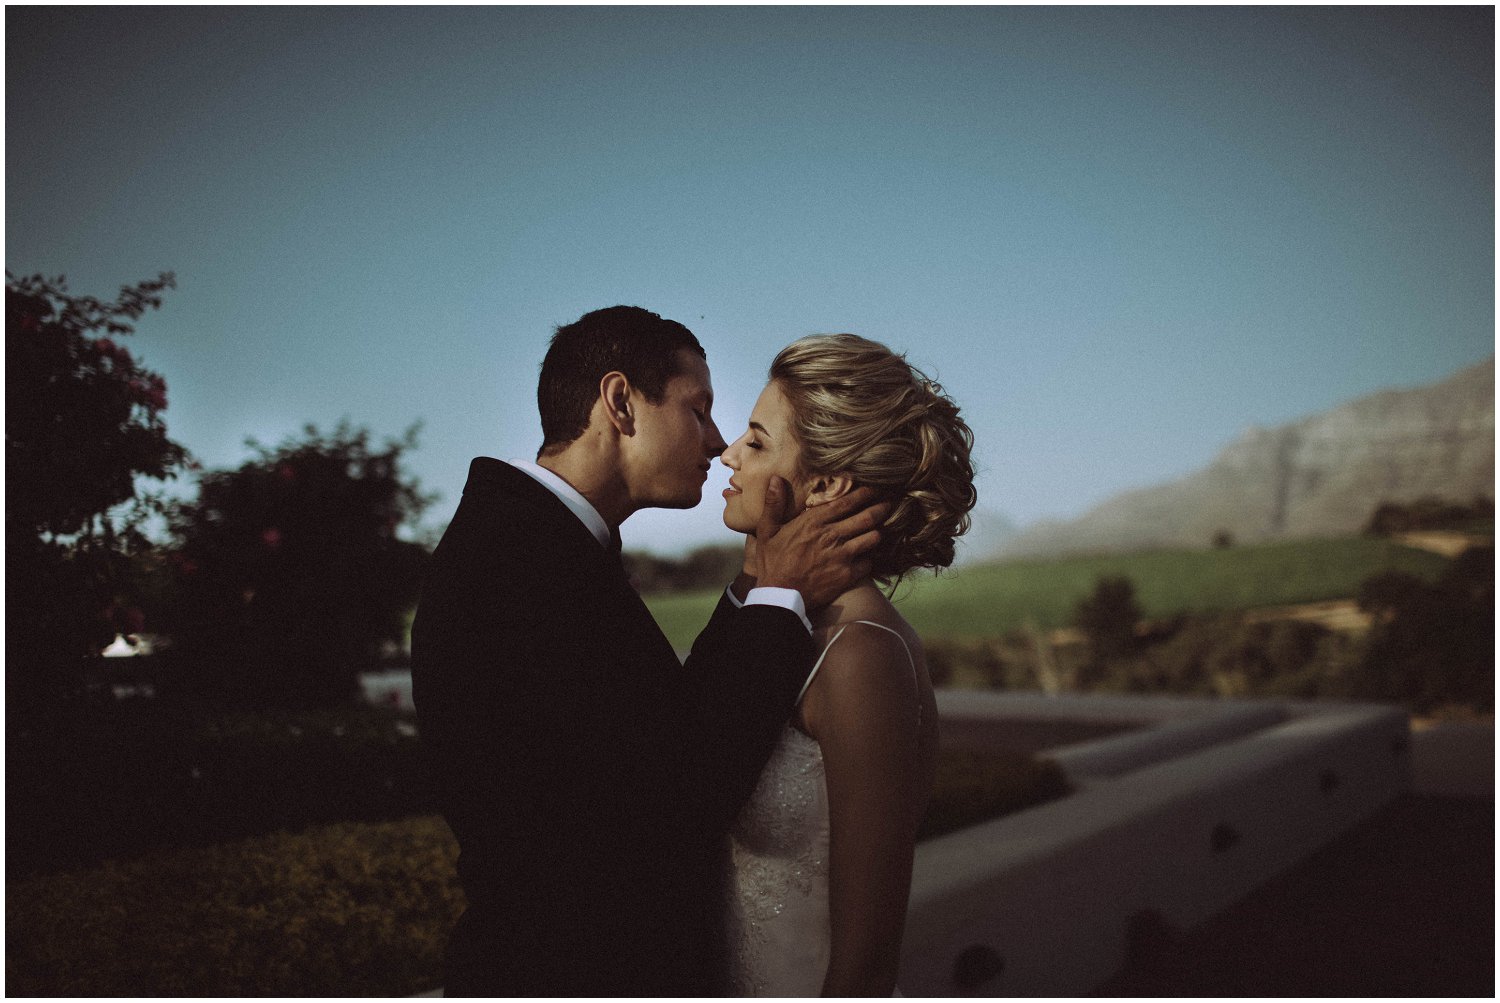 Top Artistic Creative Documentary Wedding Photographer Cape Town South Africa Rue Kruger_0145.jpg